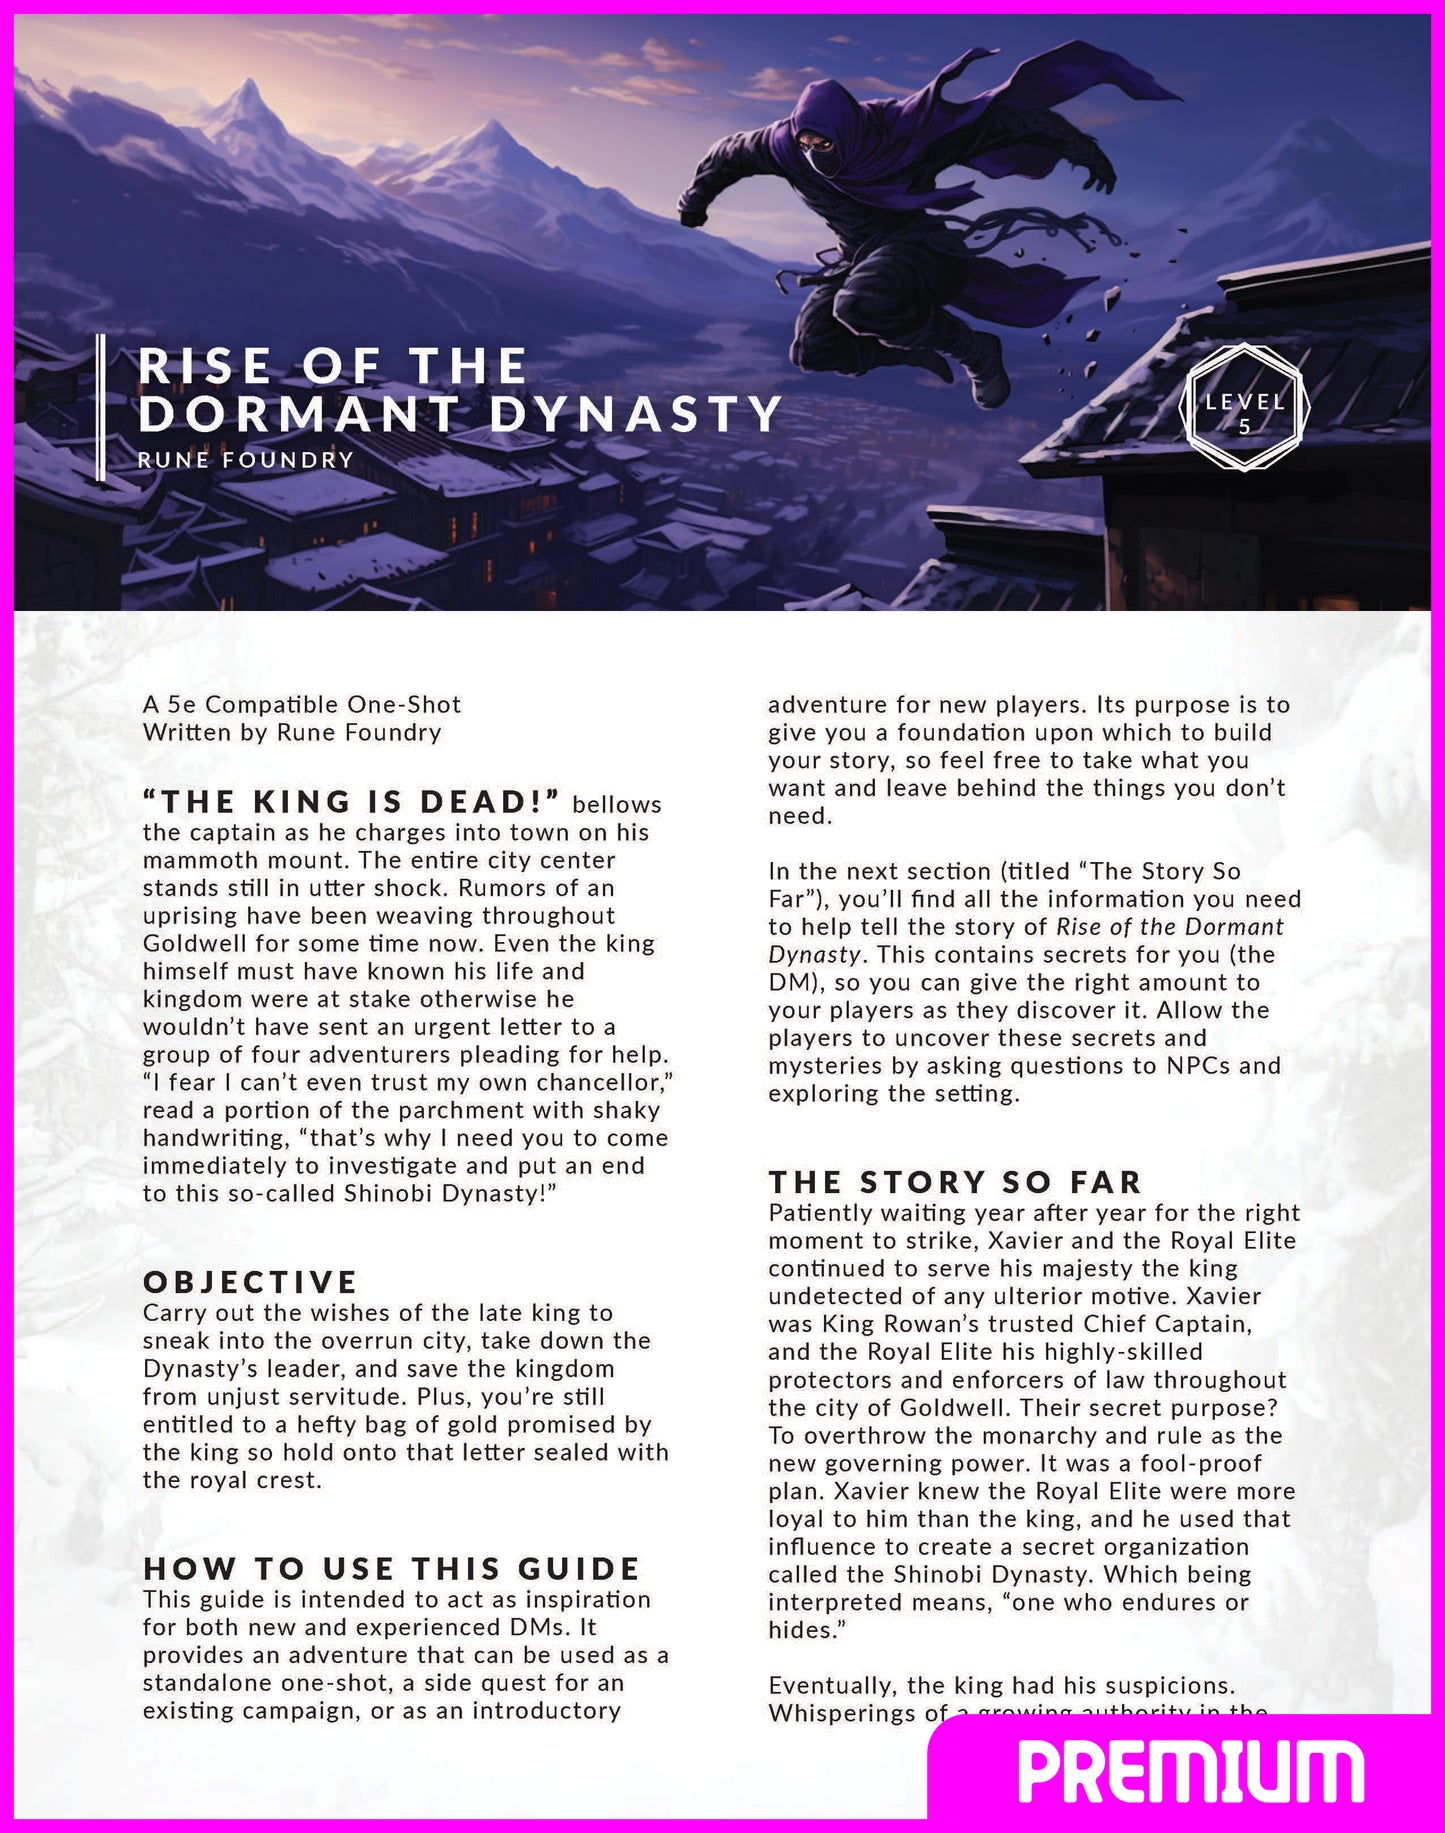 DnD One Shot Adventure for 5e, Rise of the Dormant Dynasty by Rune Foundry